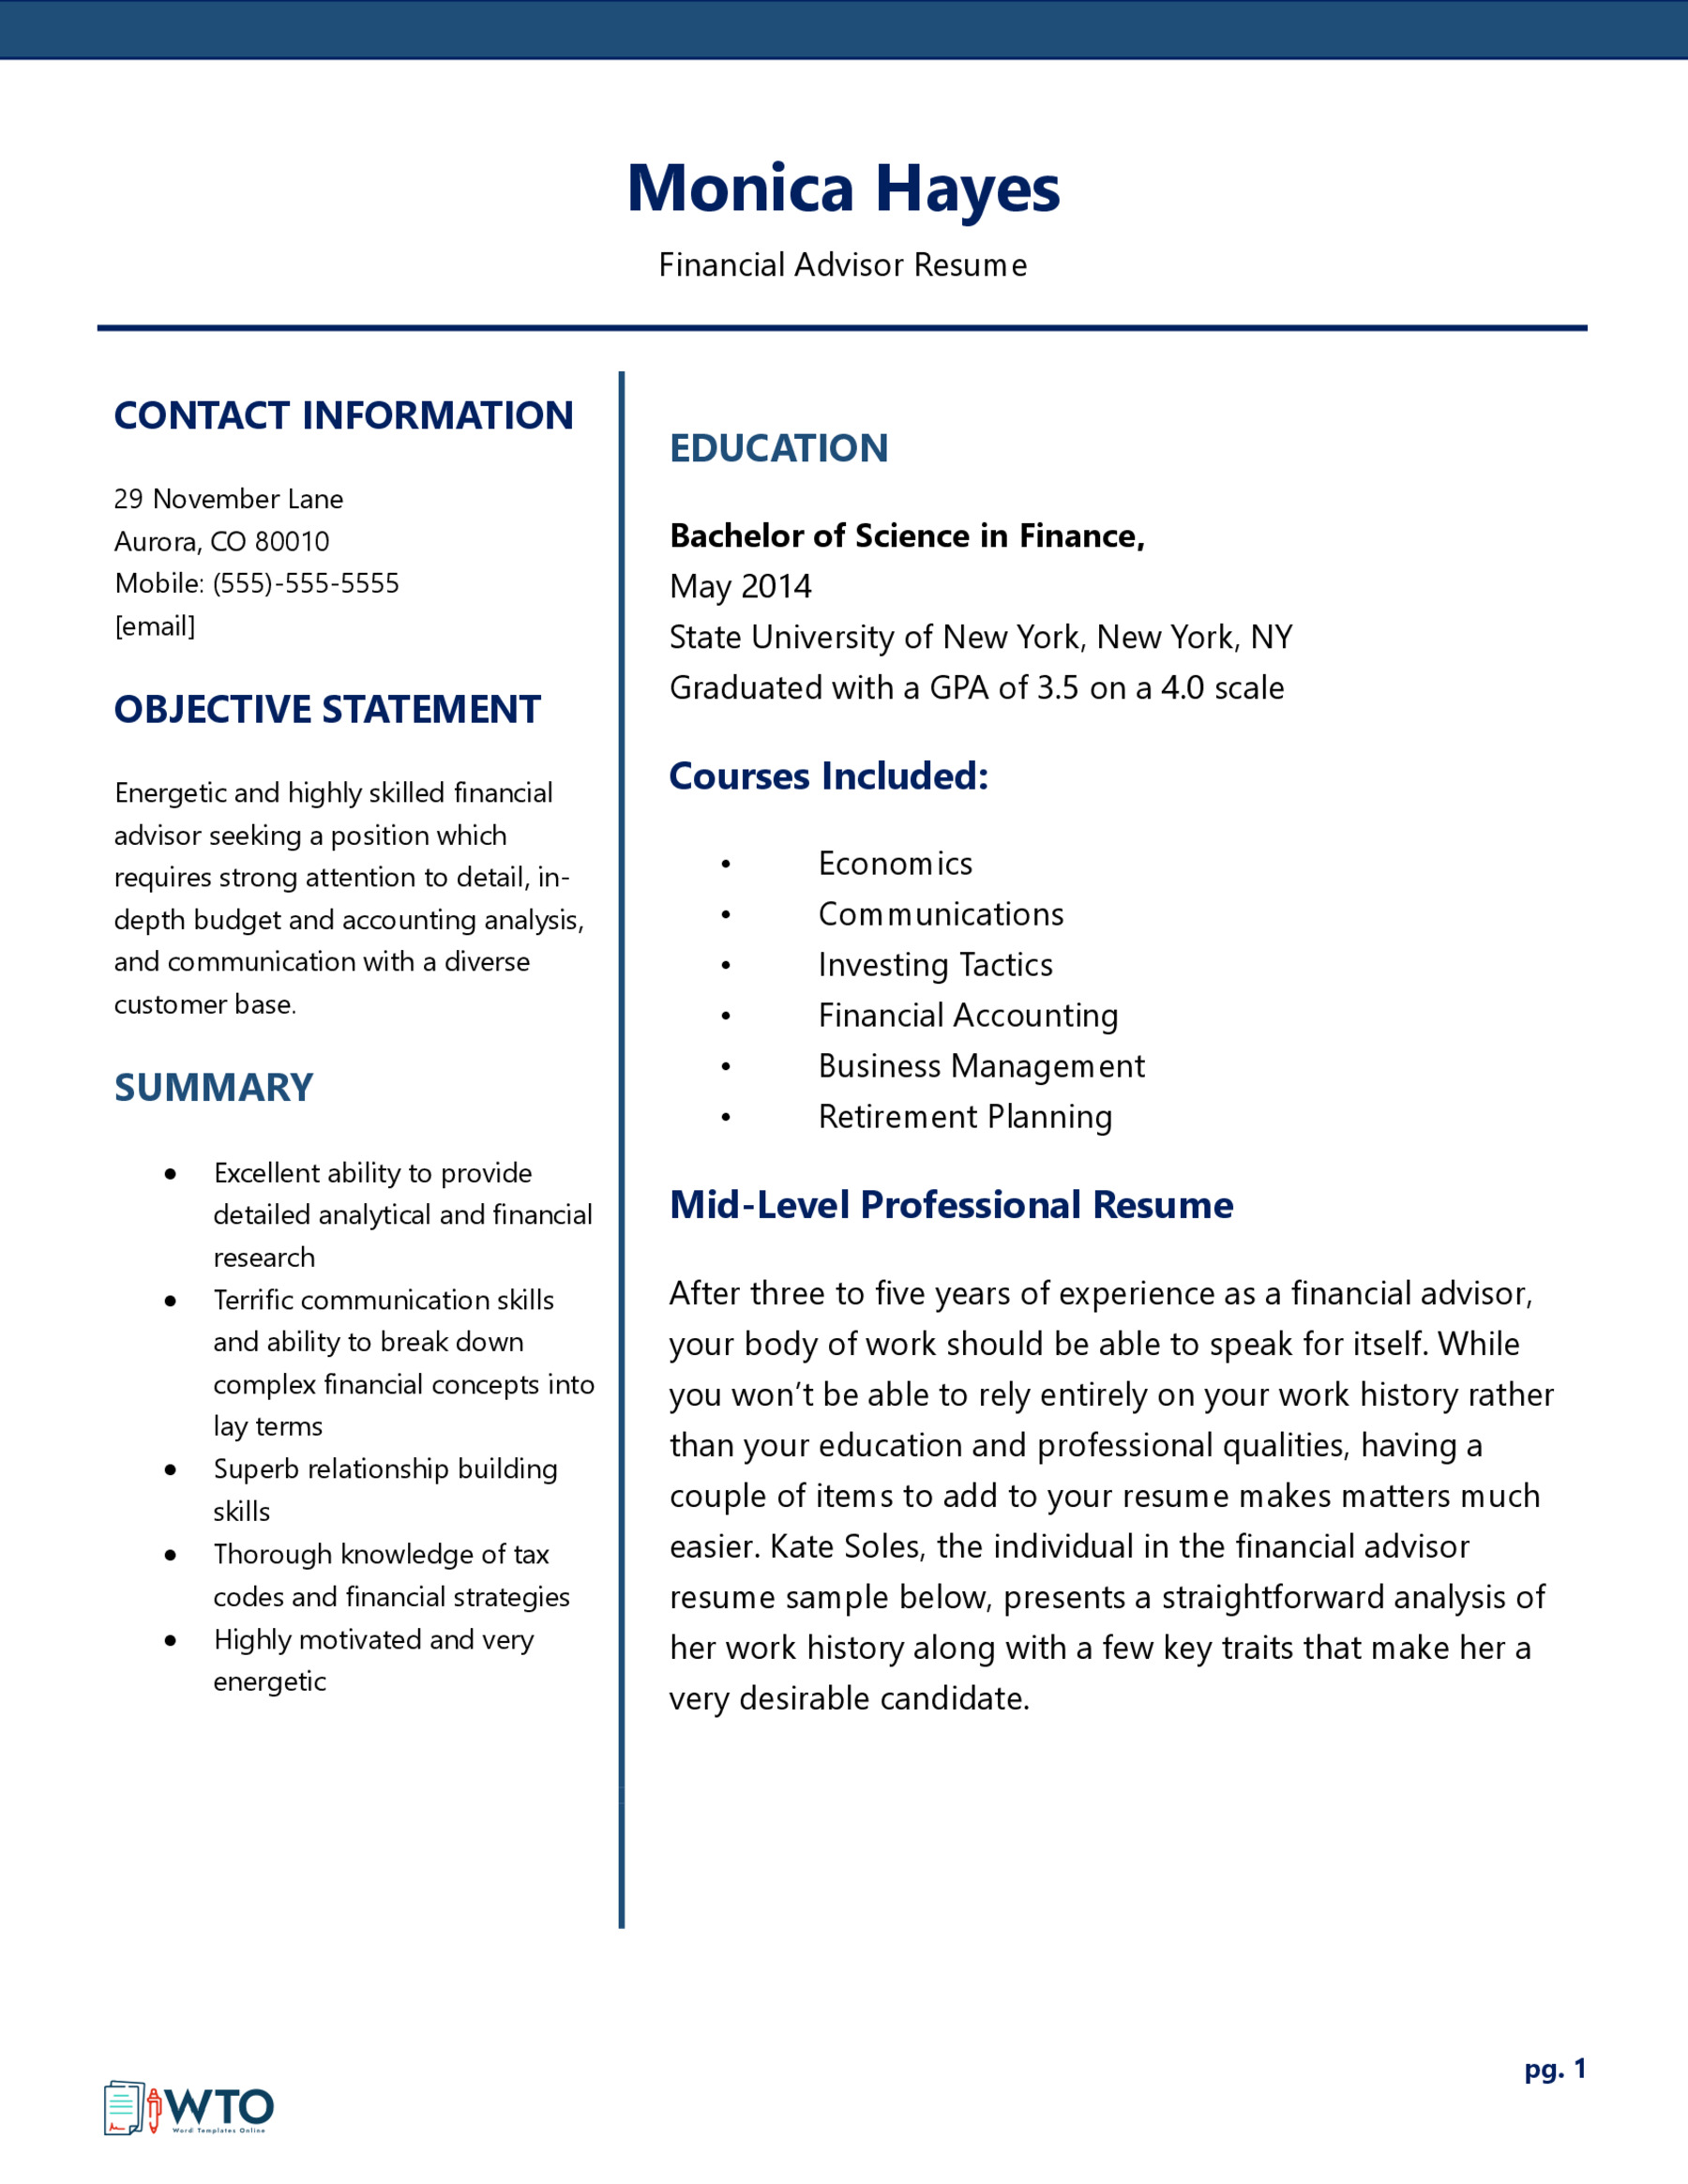 Financial Advisor Resume - Simple and Clean Format